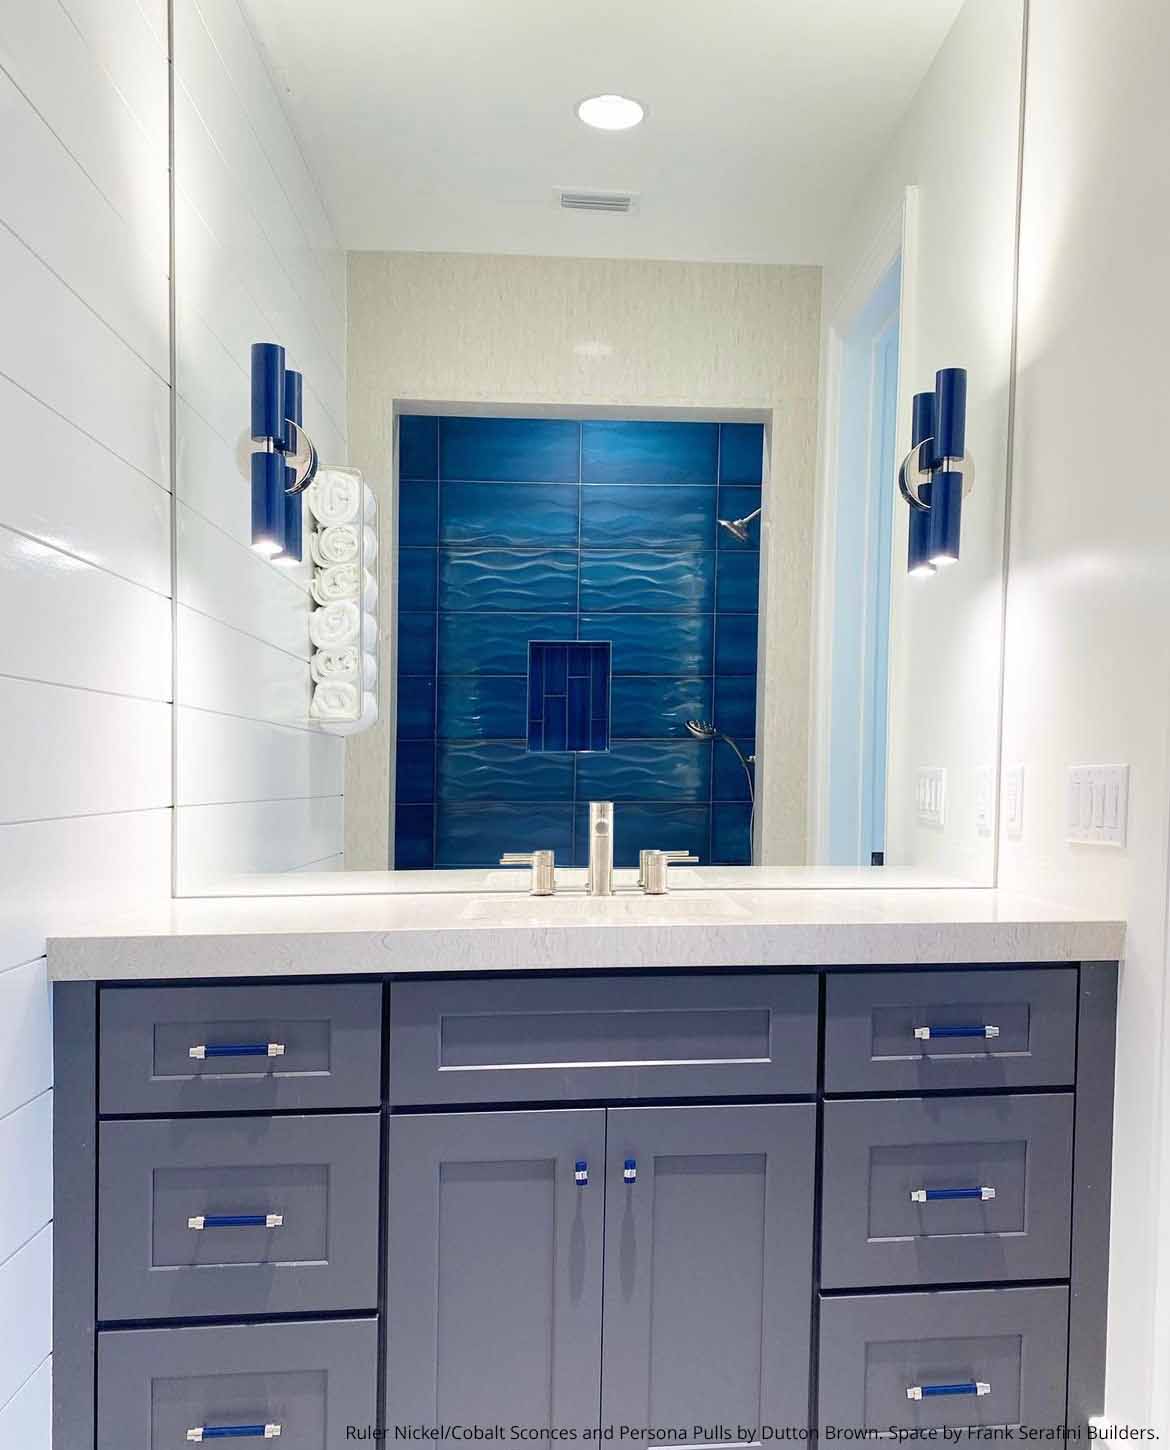 Ruler nickel/cobalt sconce and Persona pulls by Dutton Brown. Space by Frank Serafini Builders.